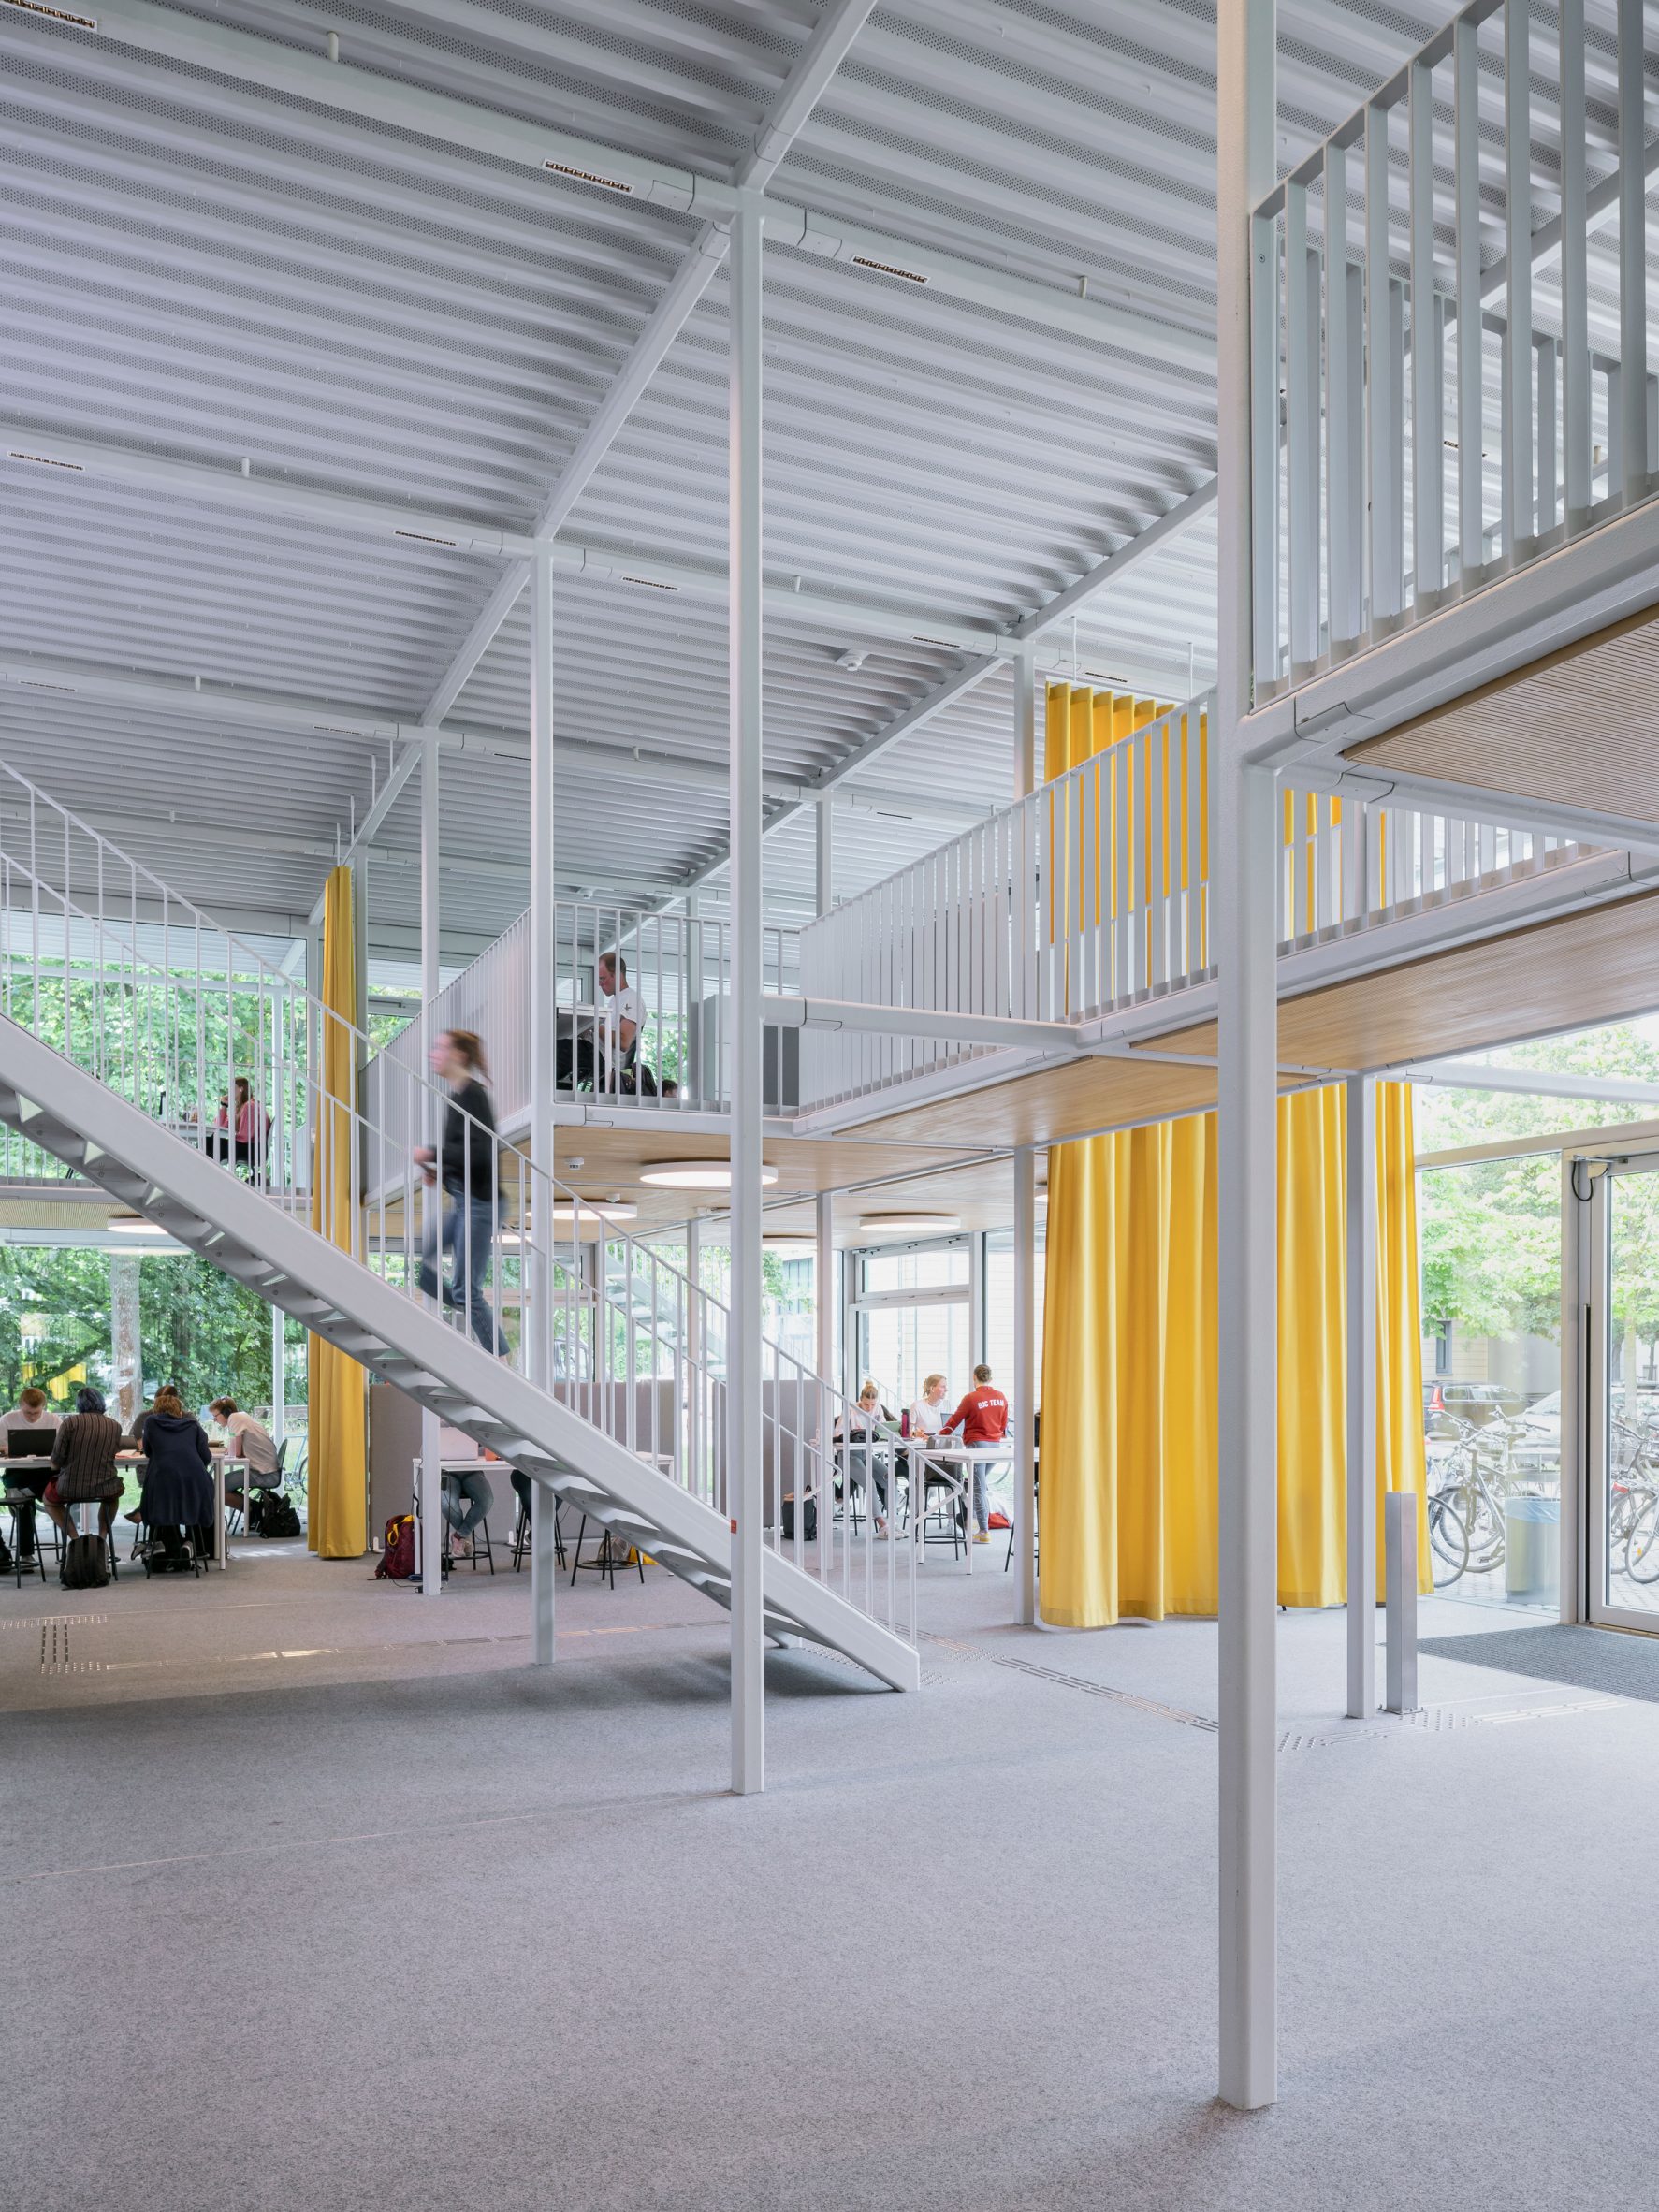 Interior modular configuration of The Study Pavilion at TU Braunschweig by Gustav Düsing and Max Hacke in Germany